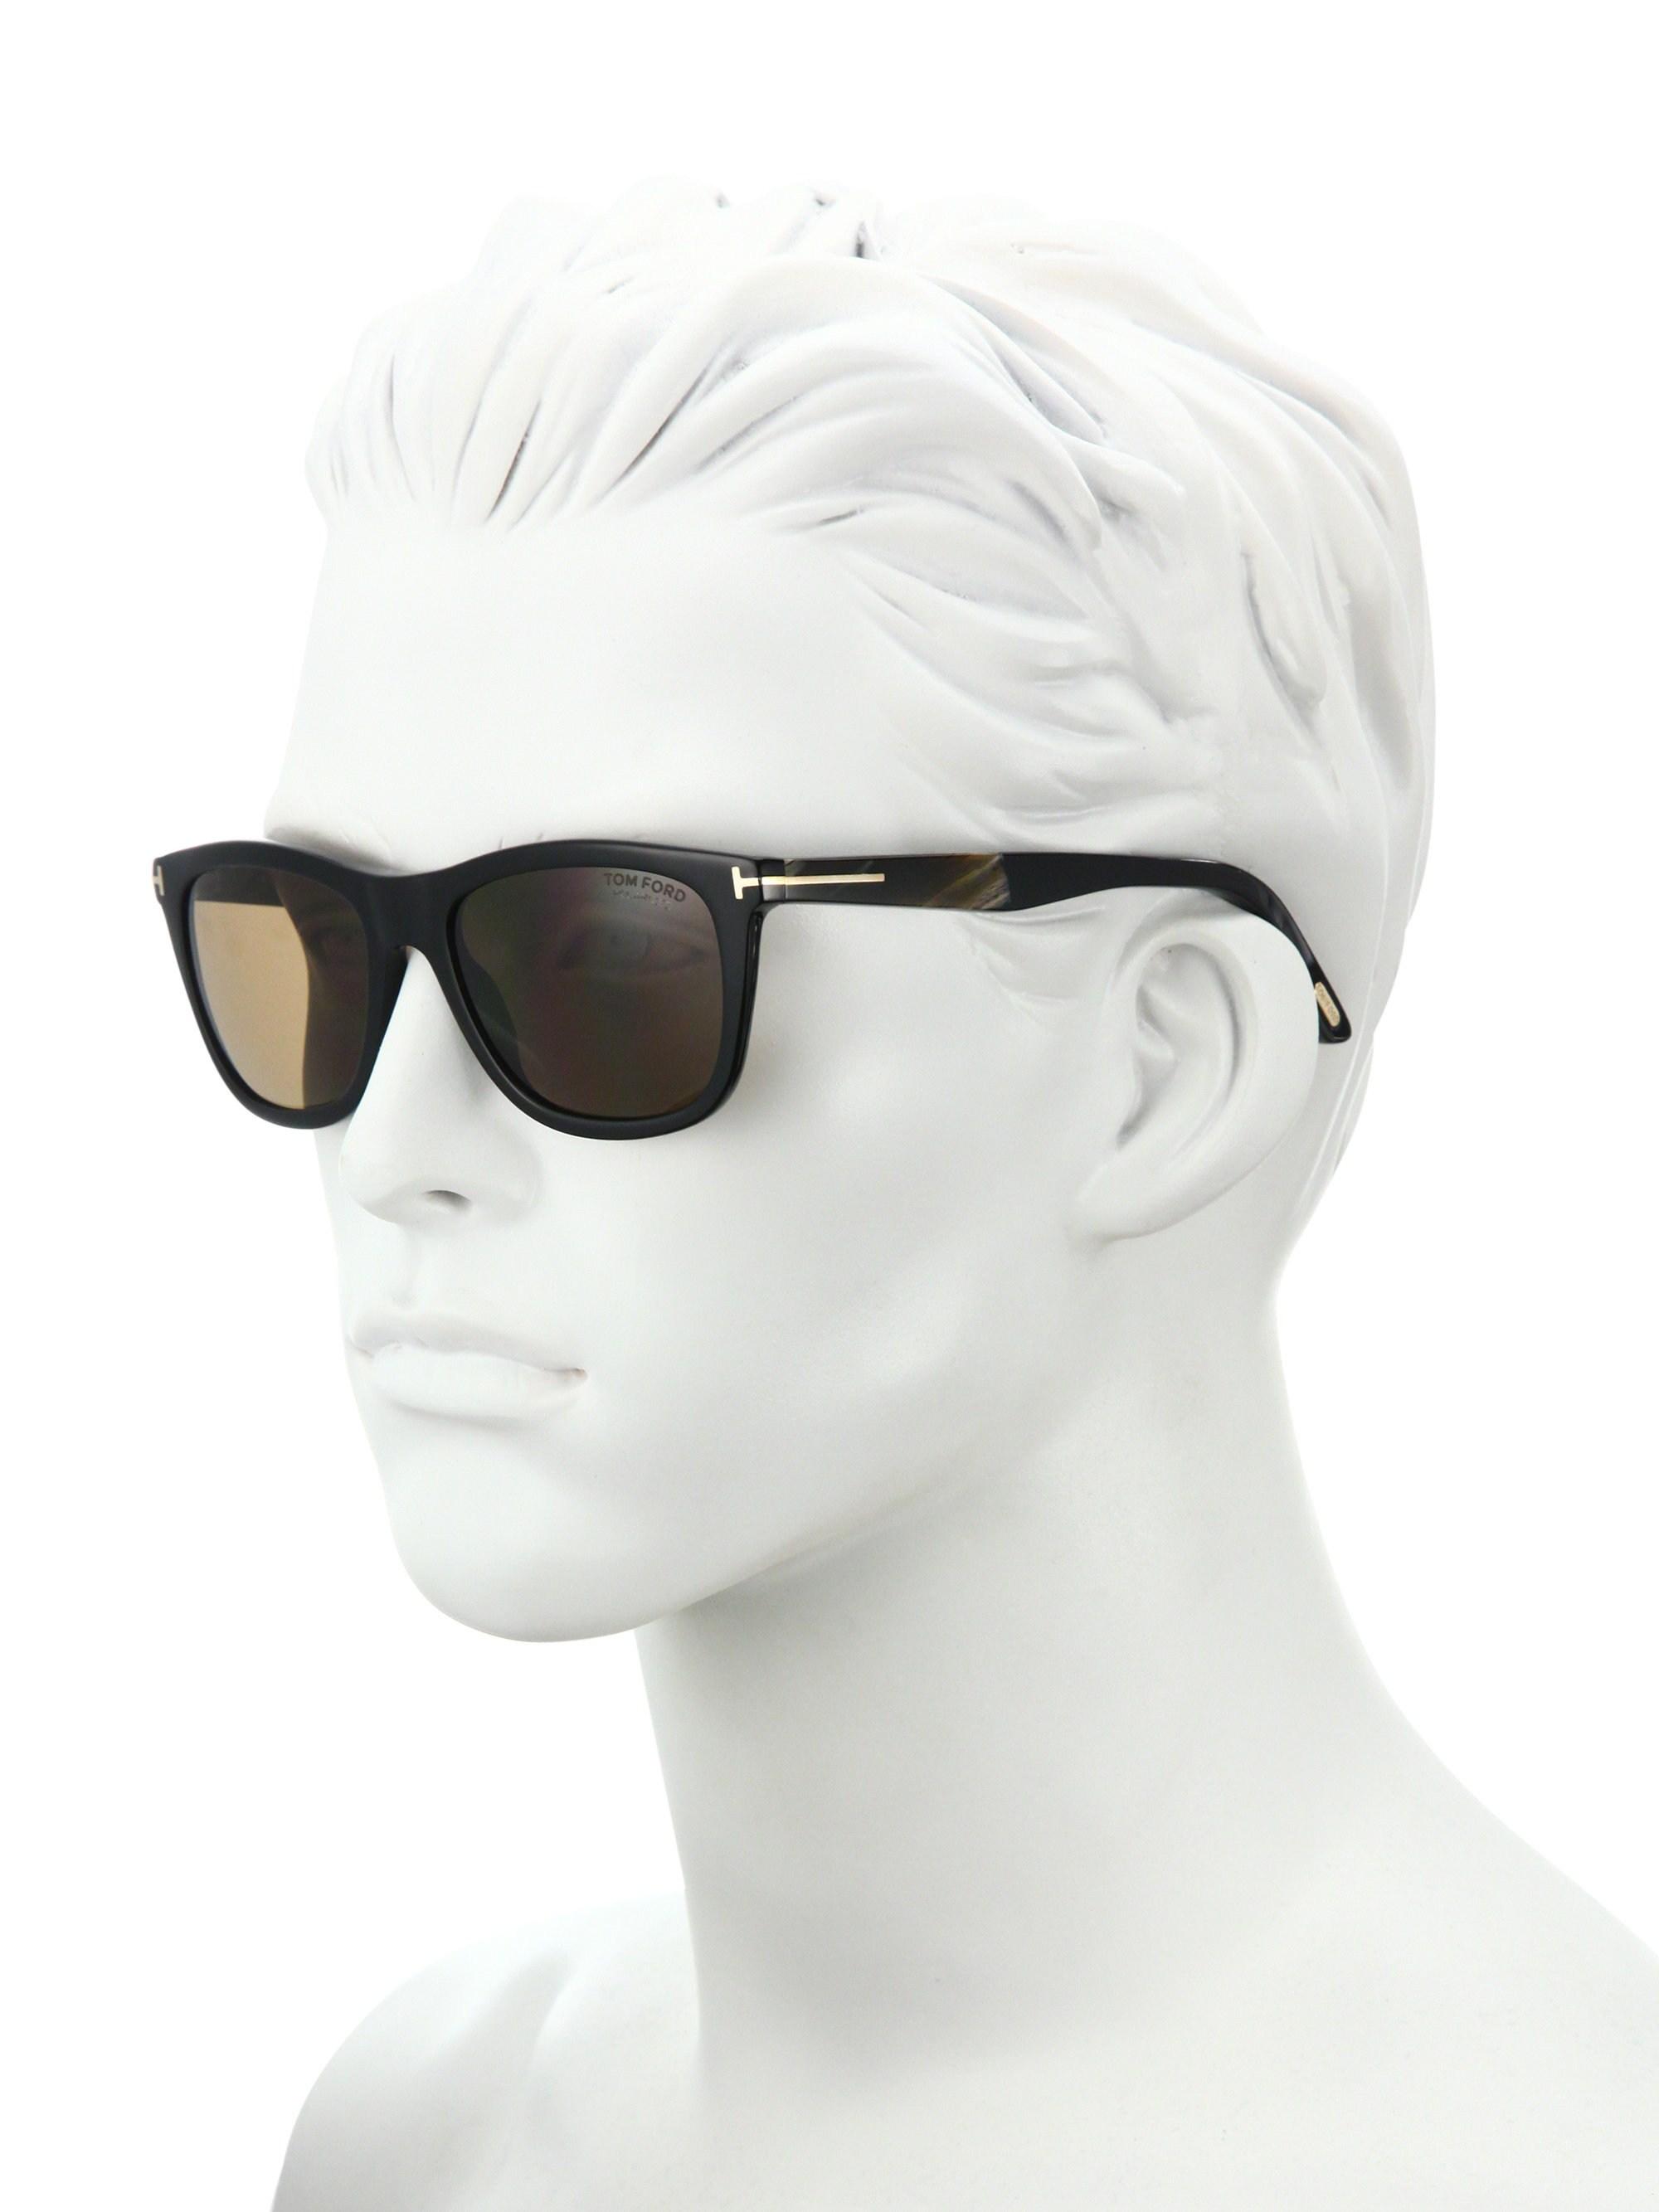 Andrew Tom Ford Sunglasses Outlet, SAVE 54%.